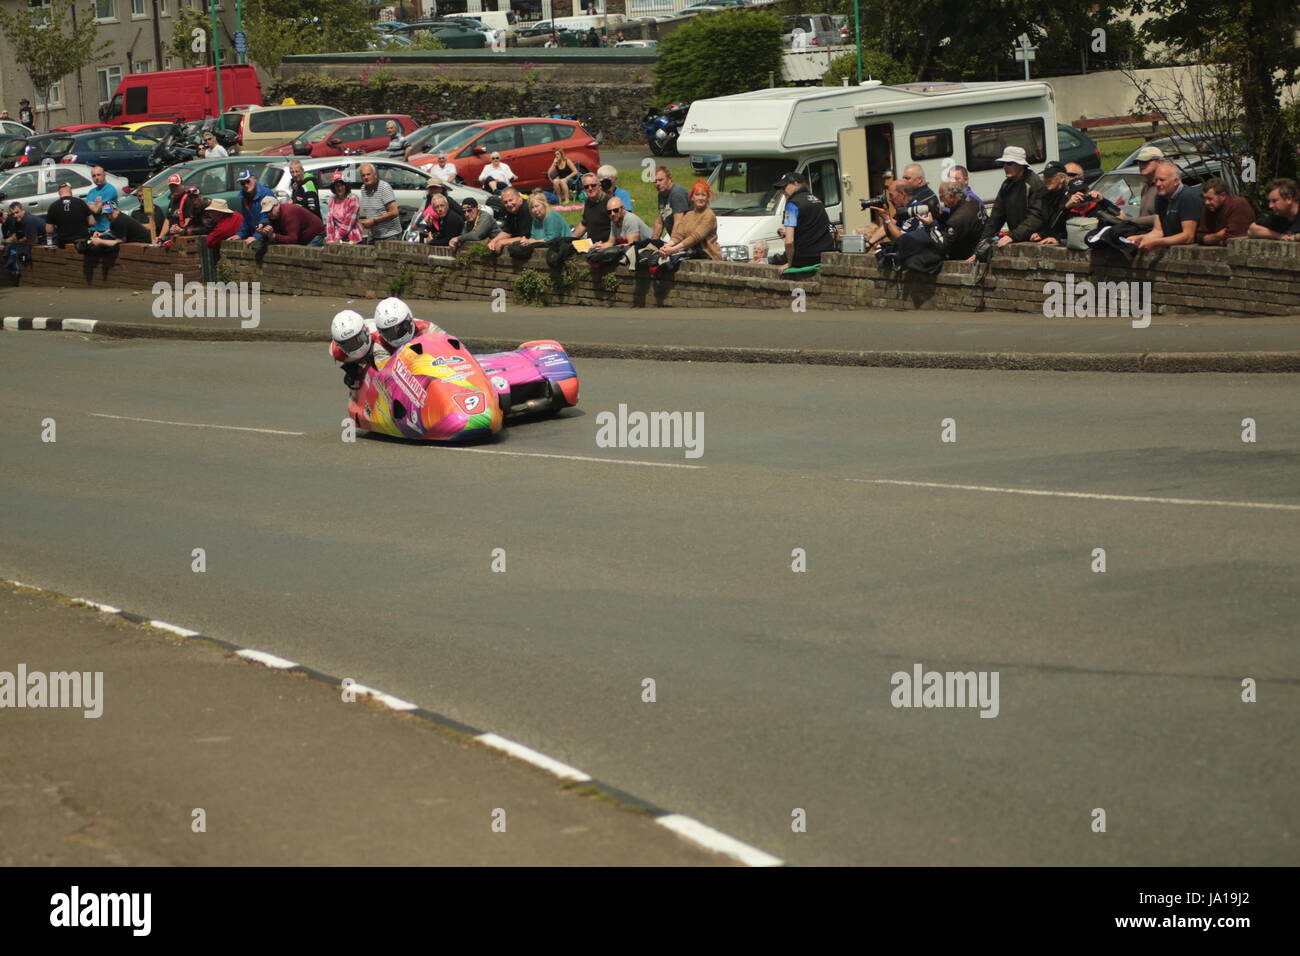 Isle of Man TT Races, Sidecar Qualifying Practice Race, Saturday 3 June 2017. Sidecar qualifying session. Number 9, Steve Ramsden , Matty Ramsdenon their 600cc LCR Honda sidecar from the Ramsden Racing team from Hebden Bridge, UK..Credit: Eclectic Art and Photography/Alamy Live News. Stock Photo